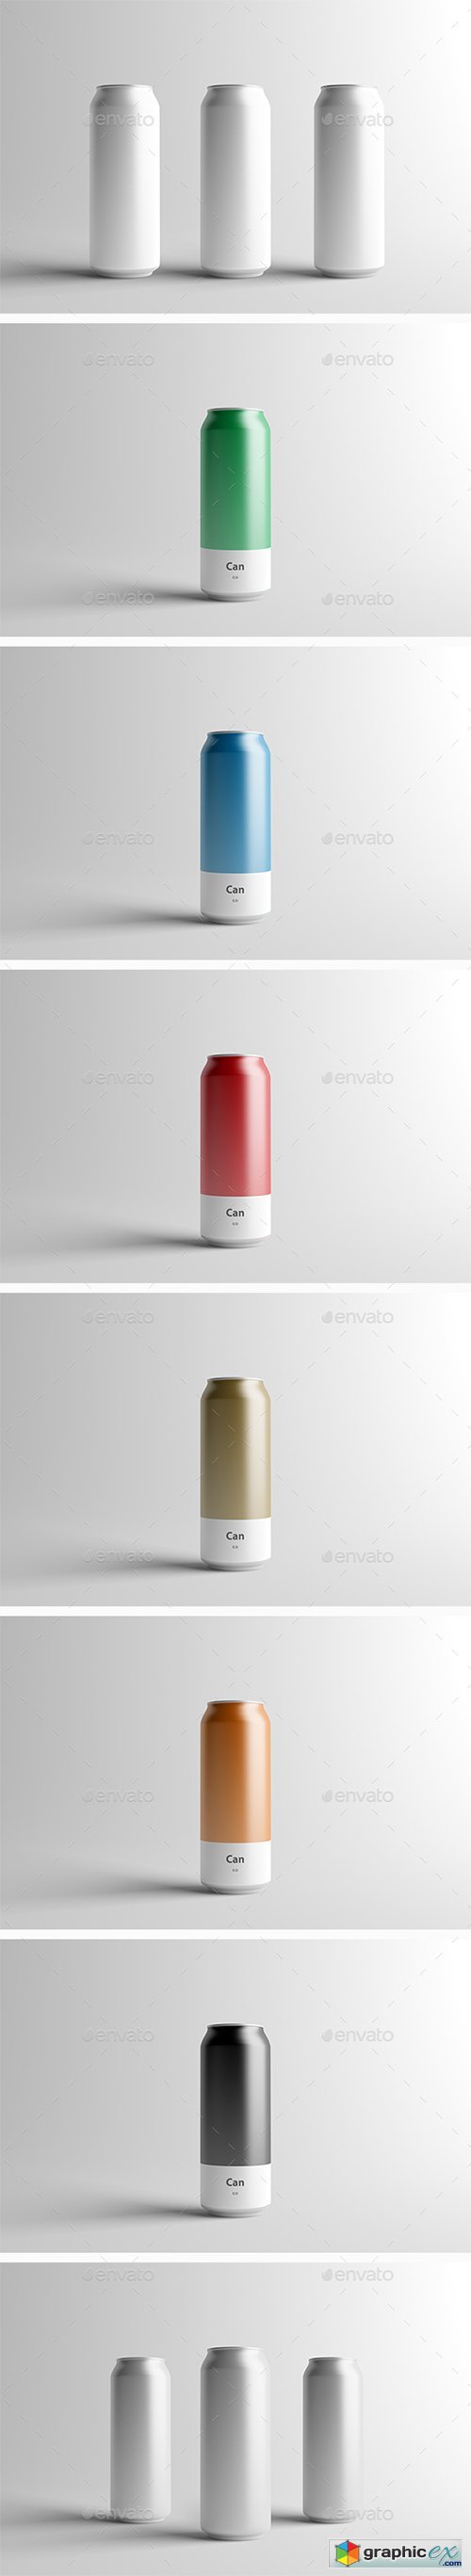 Can Mock-Up - 500ml